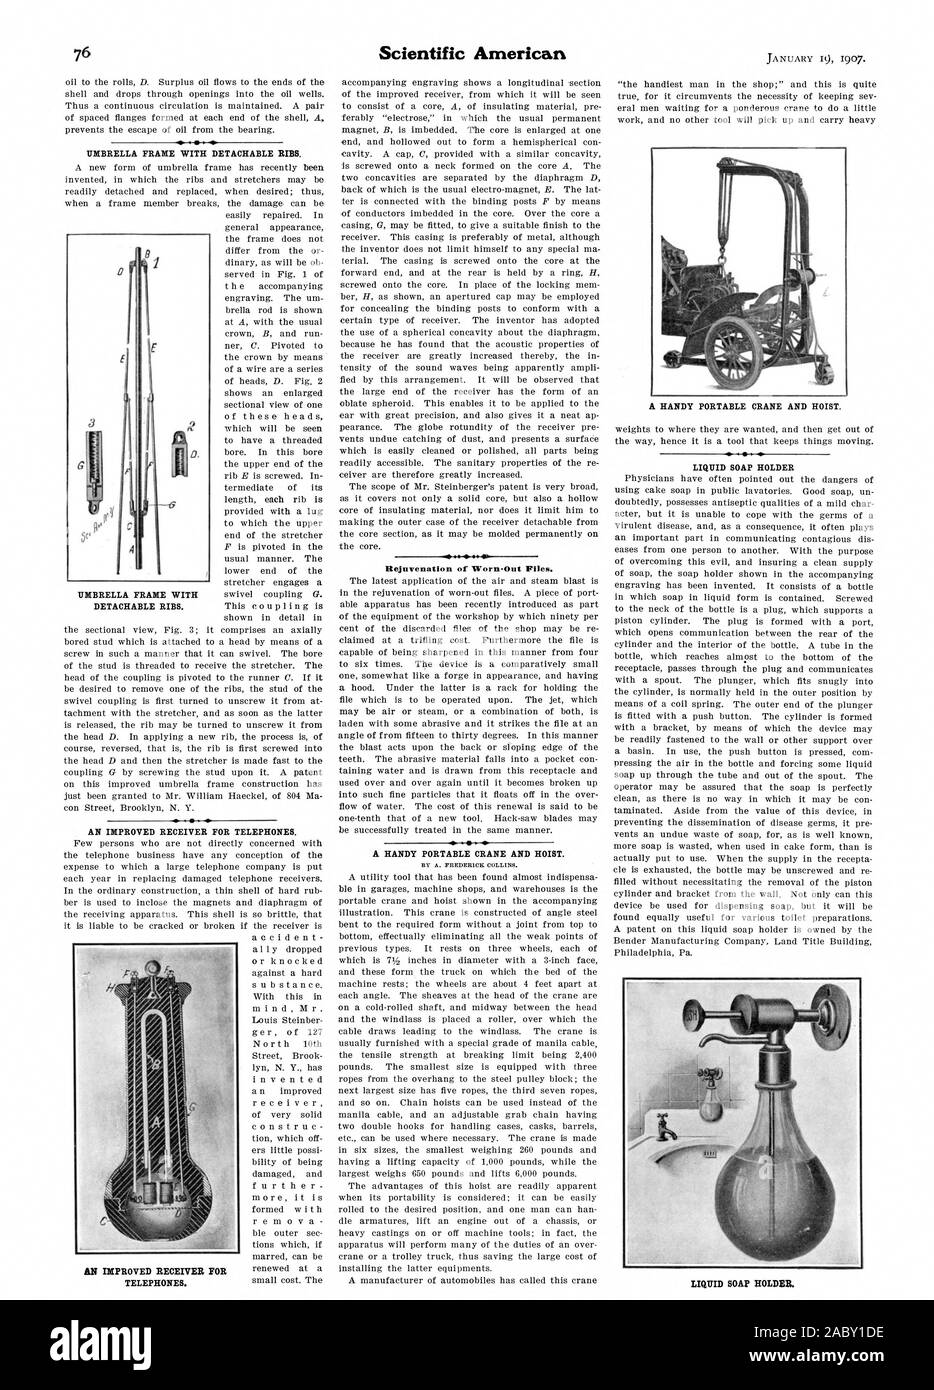 AN IMPROVED RECEIVER FOR TELEPHONES. Rejuvenation of Worn Out Files. A HANDY PORTABLE CRANE AND HOIST. BY A. FREDERICK COLLINS. A HANDY PORTABLE CRANE AND HOIST. LIQUID SOAP HOLDER LIQUID SOAP ROLDER. UMBRELLA FRAME WITH DETACHABLE RIBS. AN IMPROVED RECEIVER FOR TELEPHONES., scientific american, 1907-01-11 Stock Photo